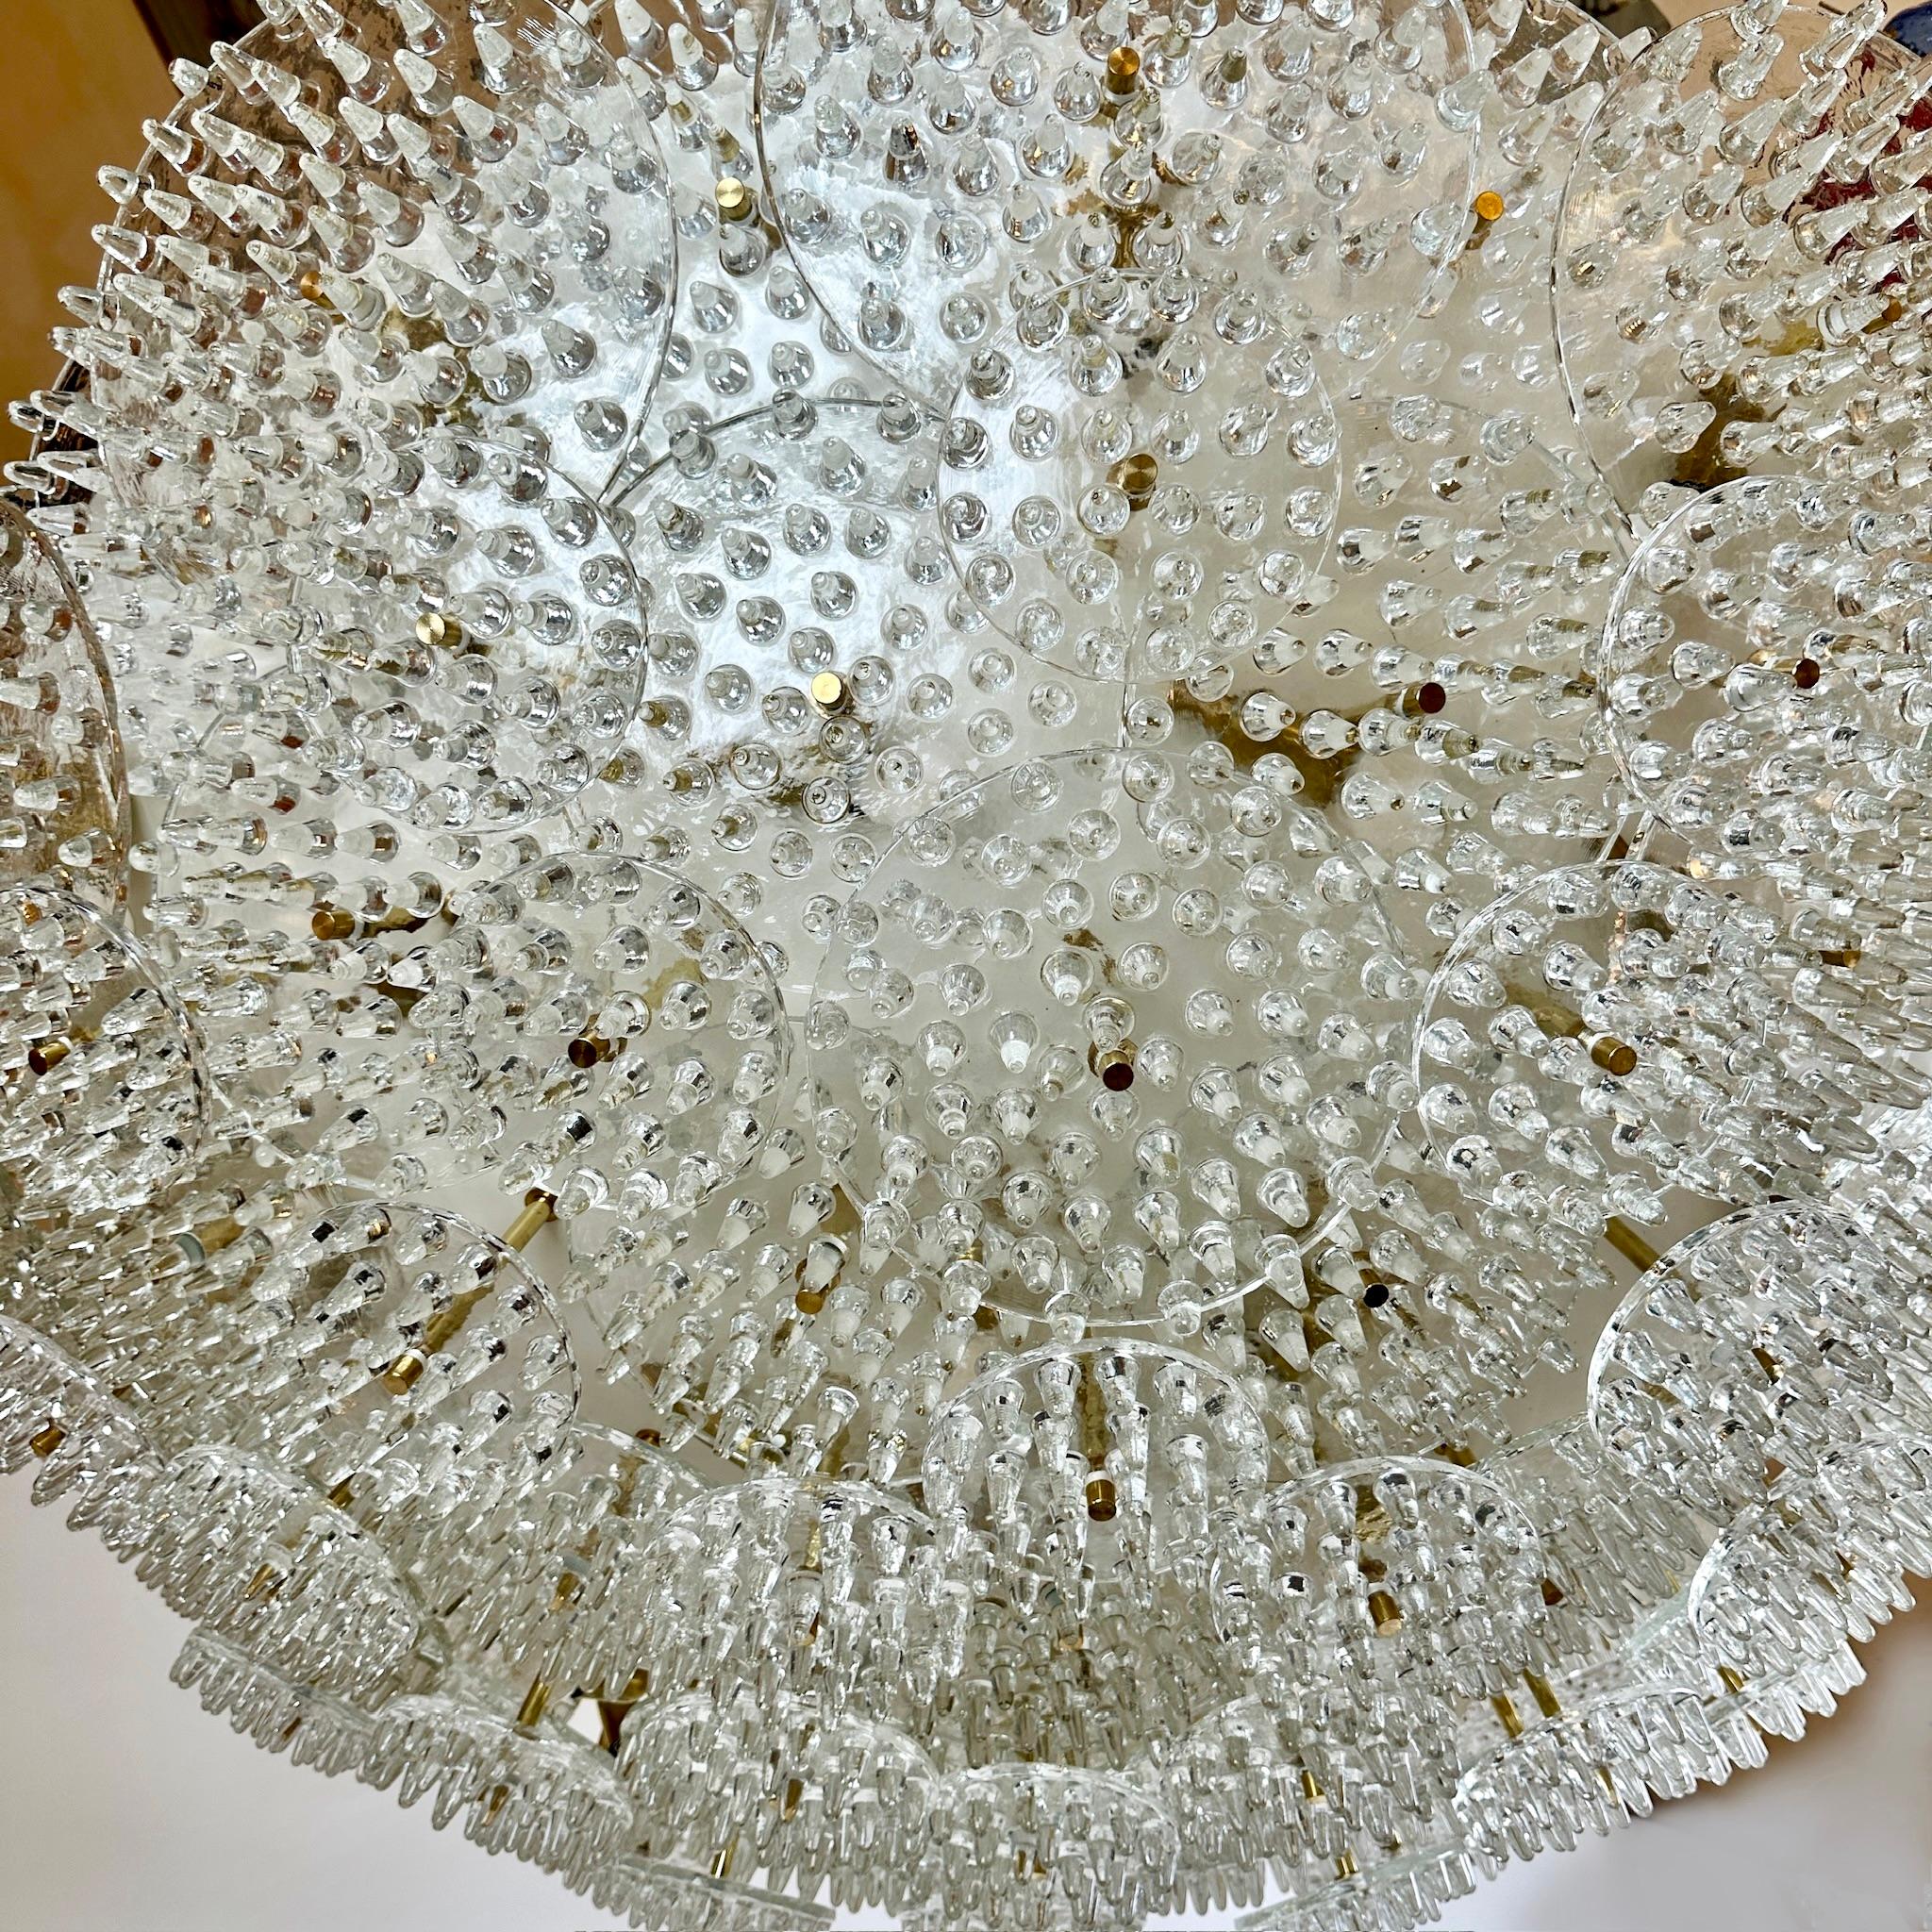 Impressive white metal & brass with three kinds of transparent Murano glass disks full of pinnacles (size: 15, 25 & 30 Diam. cm.) flush mount / chandelier.
Recommended 31 E14 Warm light bulbs.
Approx weight: 180 Kg. 